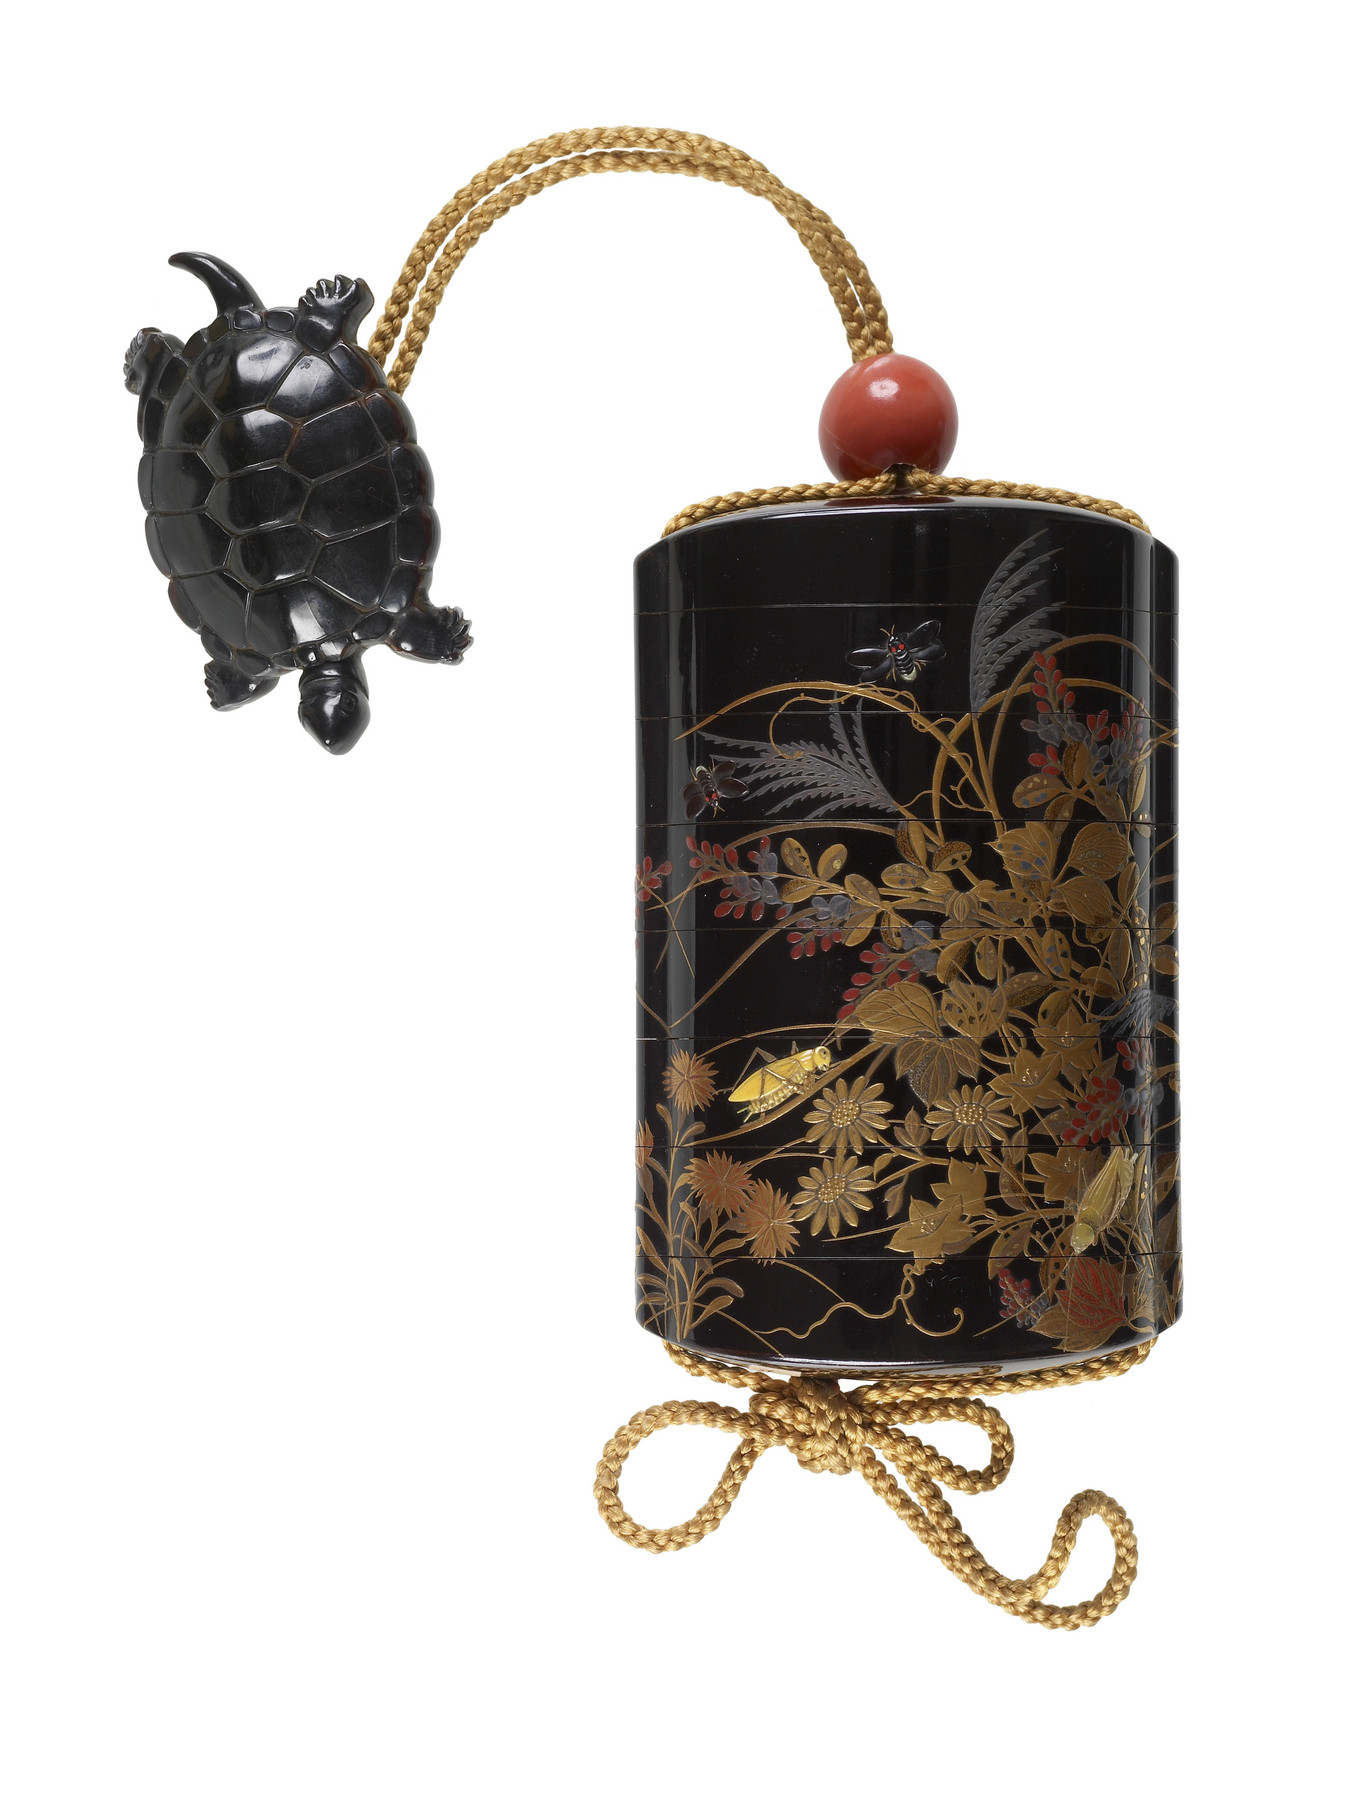 Image for Inro with Flowering Autumn Grasses, Fireflies, and Crickets; Netsuke of a Turtle